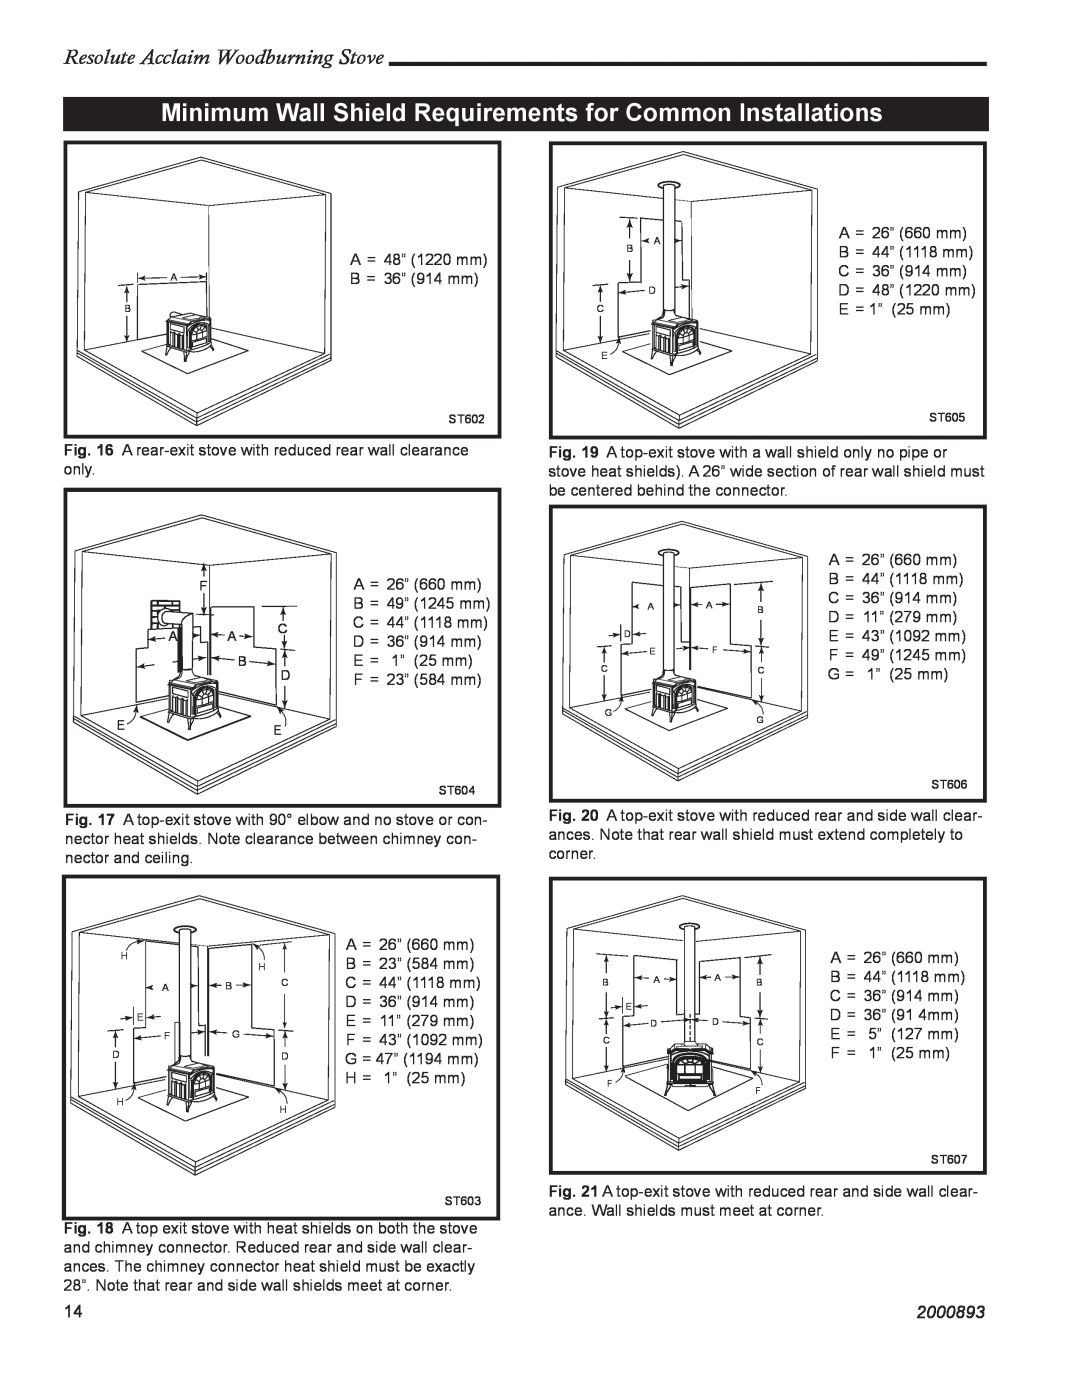 Vermont Casting 2490 installation instructions Resolute Acclaim Woodburning Stove, 2000893, A = 48” 1220 mm B = 36” 914 mm 